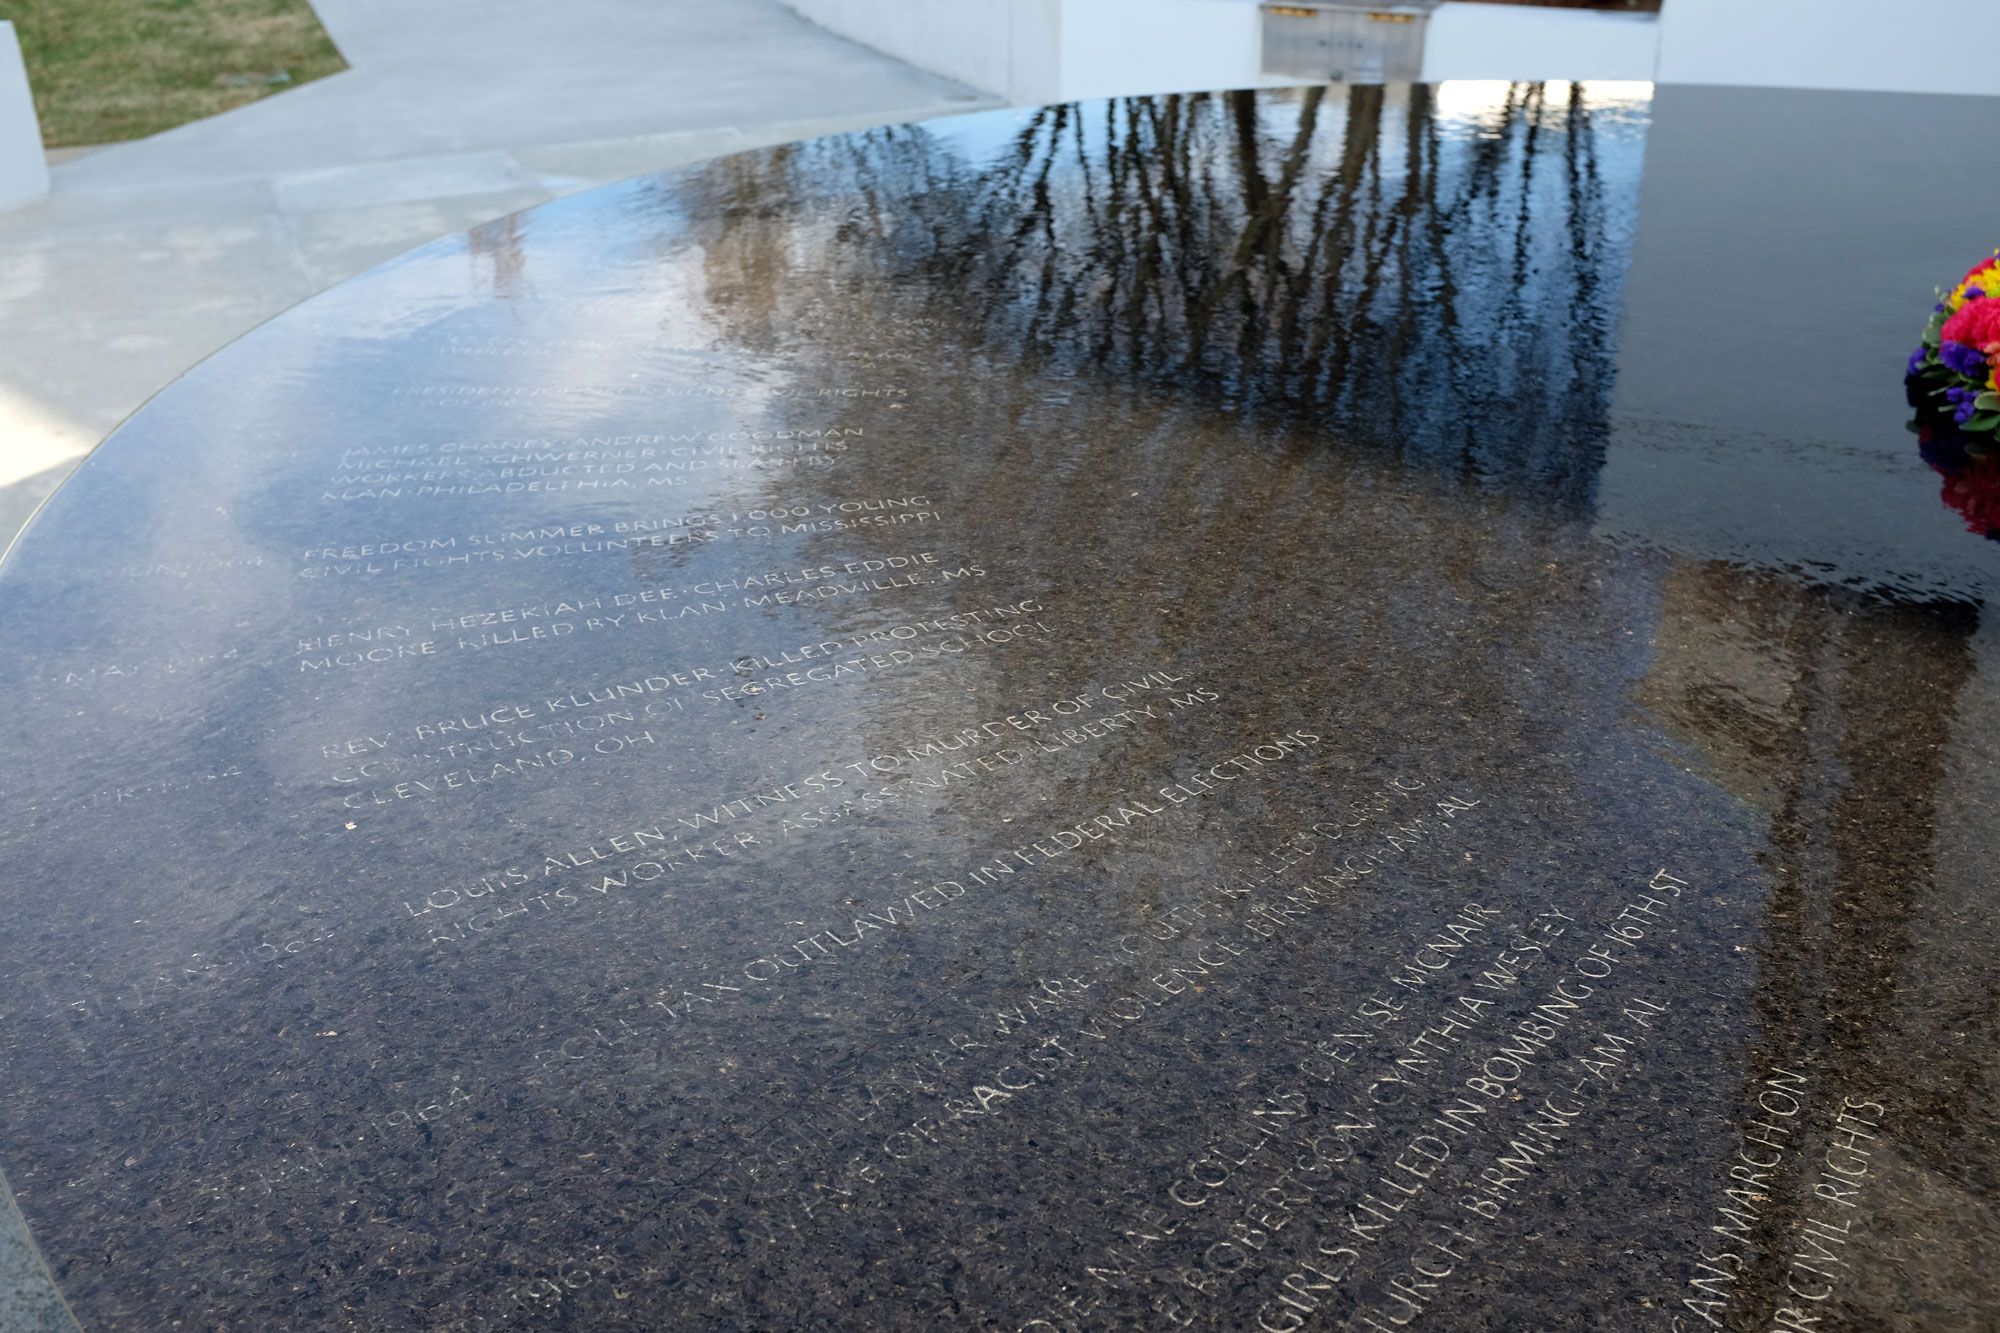 Close up of Civil Rights Memorial with inscriptions in stone covered with a thin layer of water